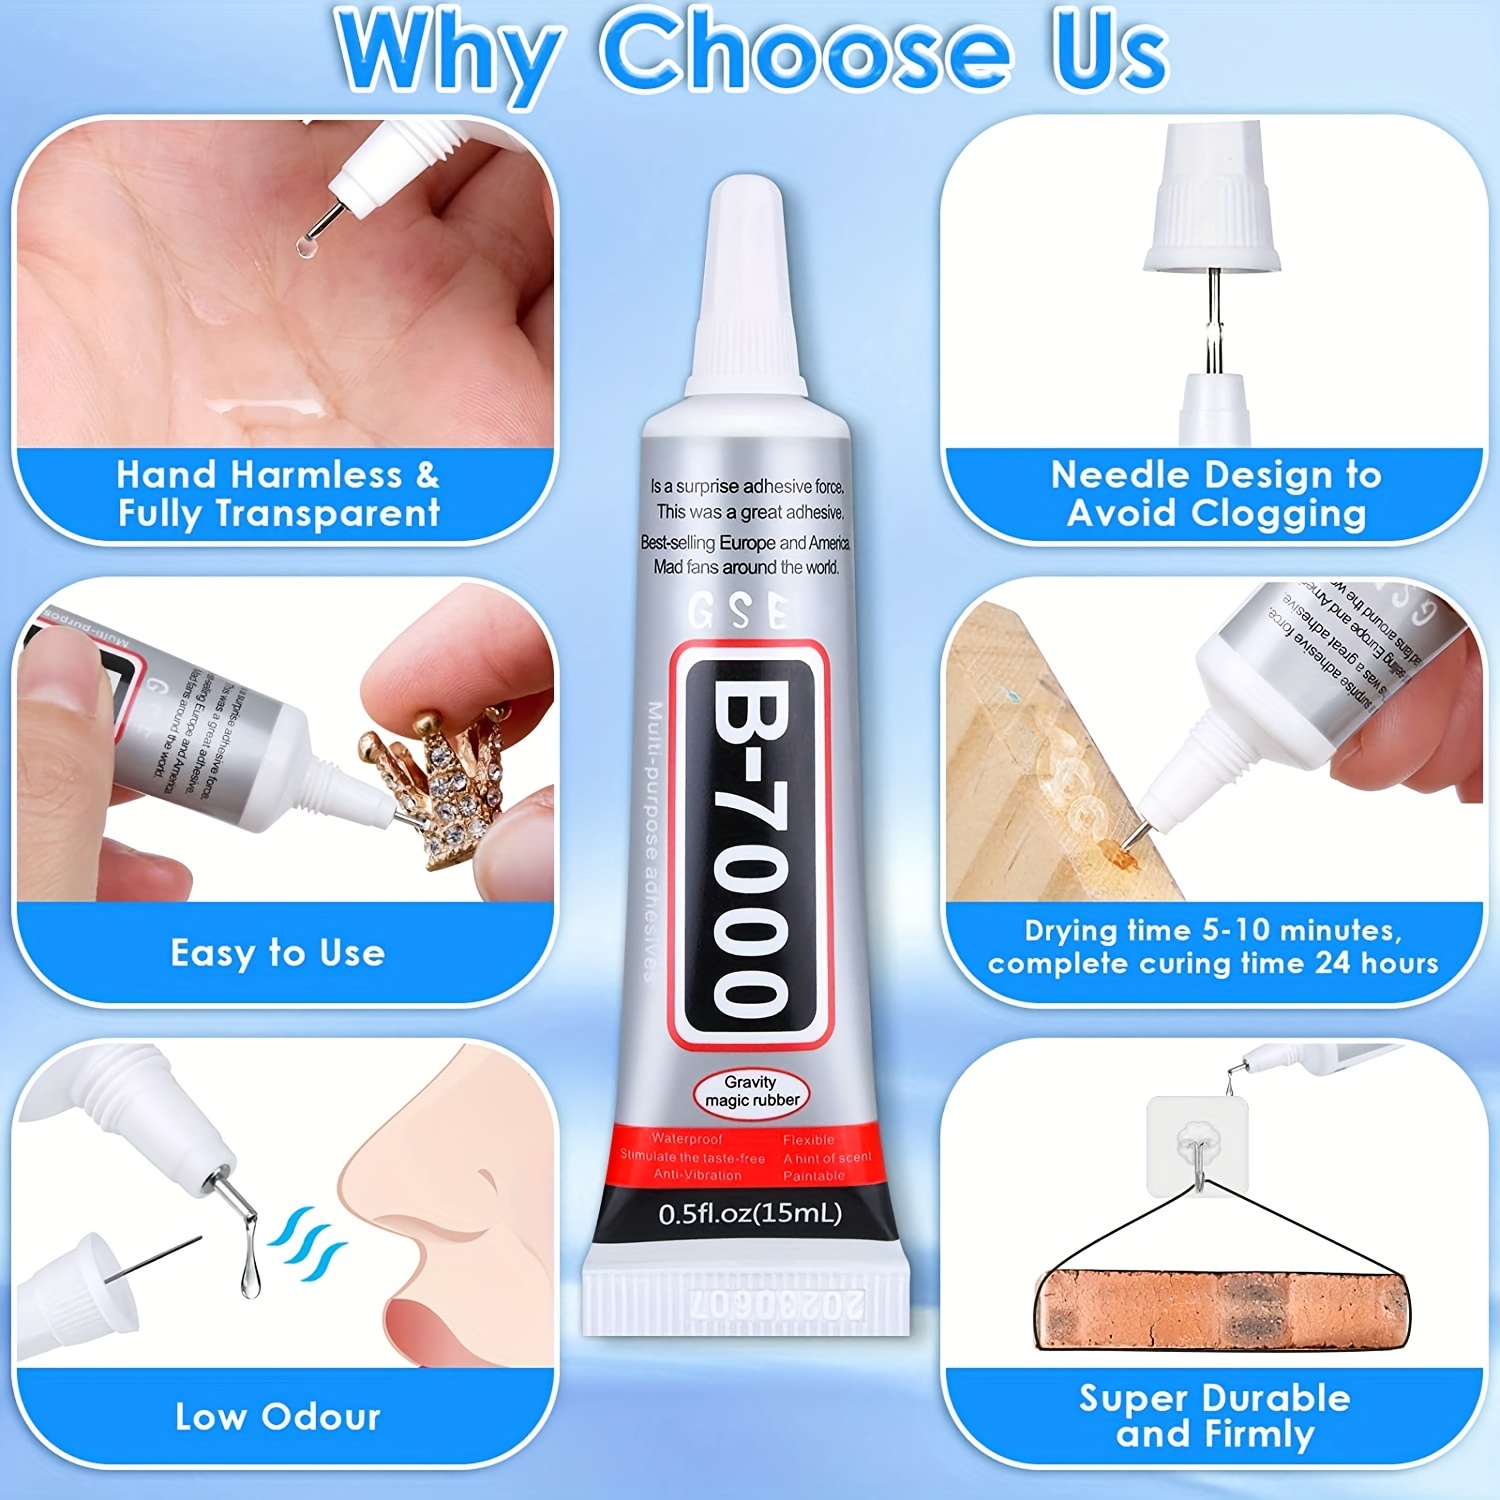 B-7000 Glue Clear for Rhinestone Crafts, Jewelry and Bead Adhesive B7000  Semi Fluid High Viscosity Glues for Clothes Shoes Fabric Cell Phones Screen